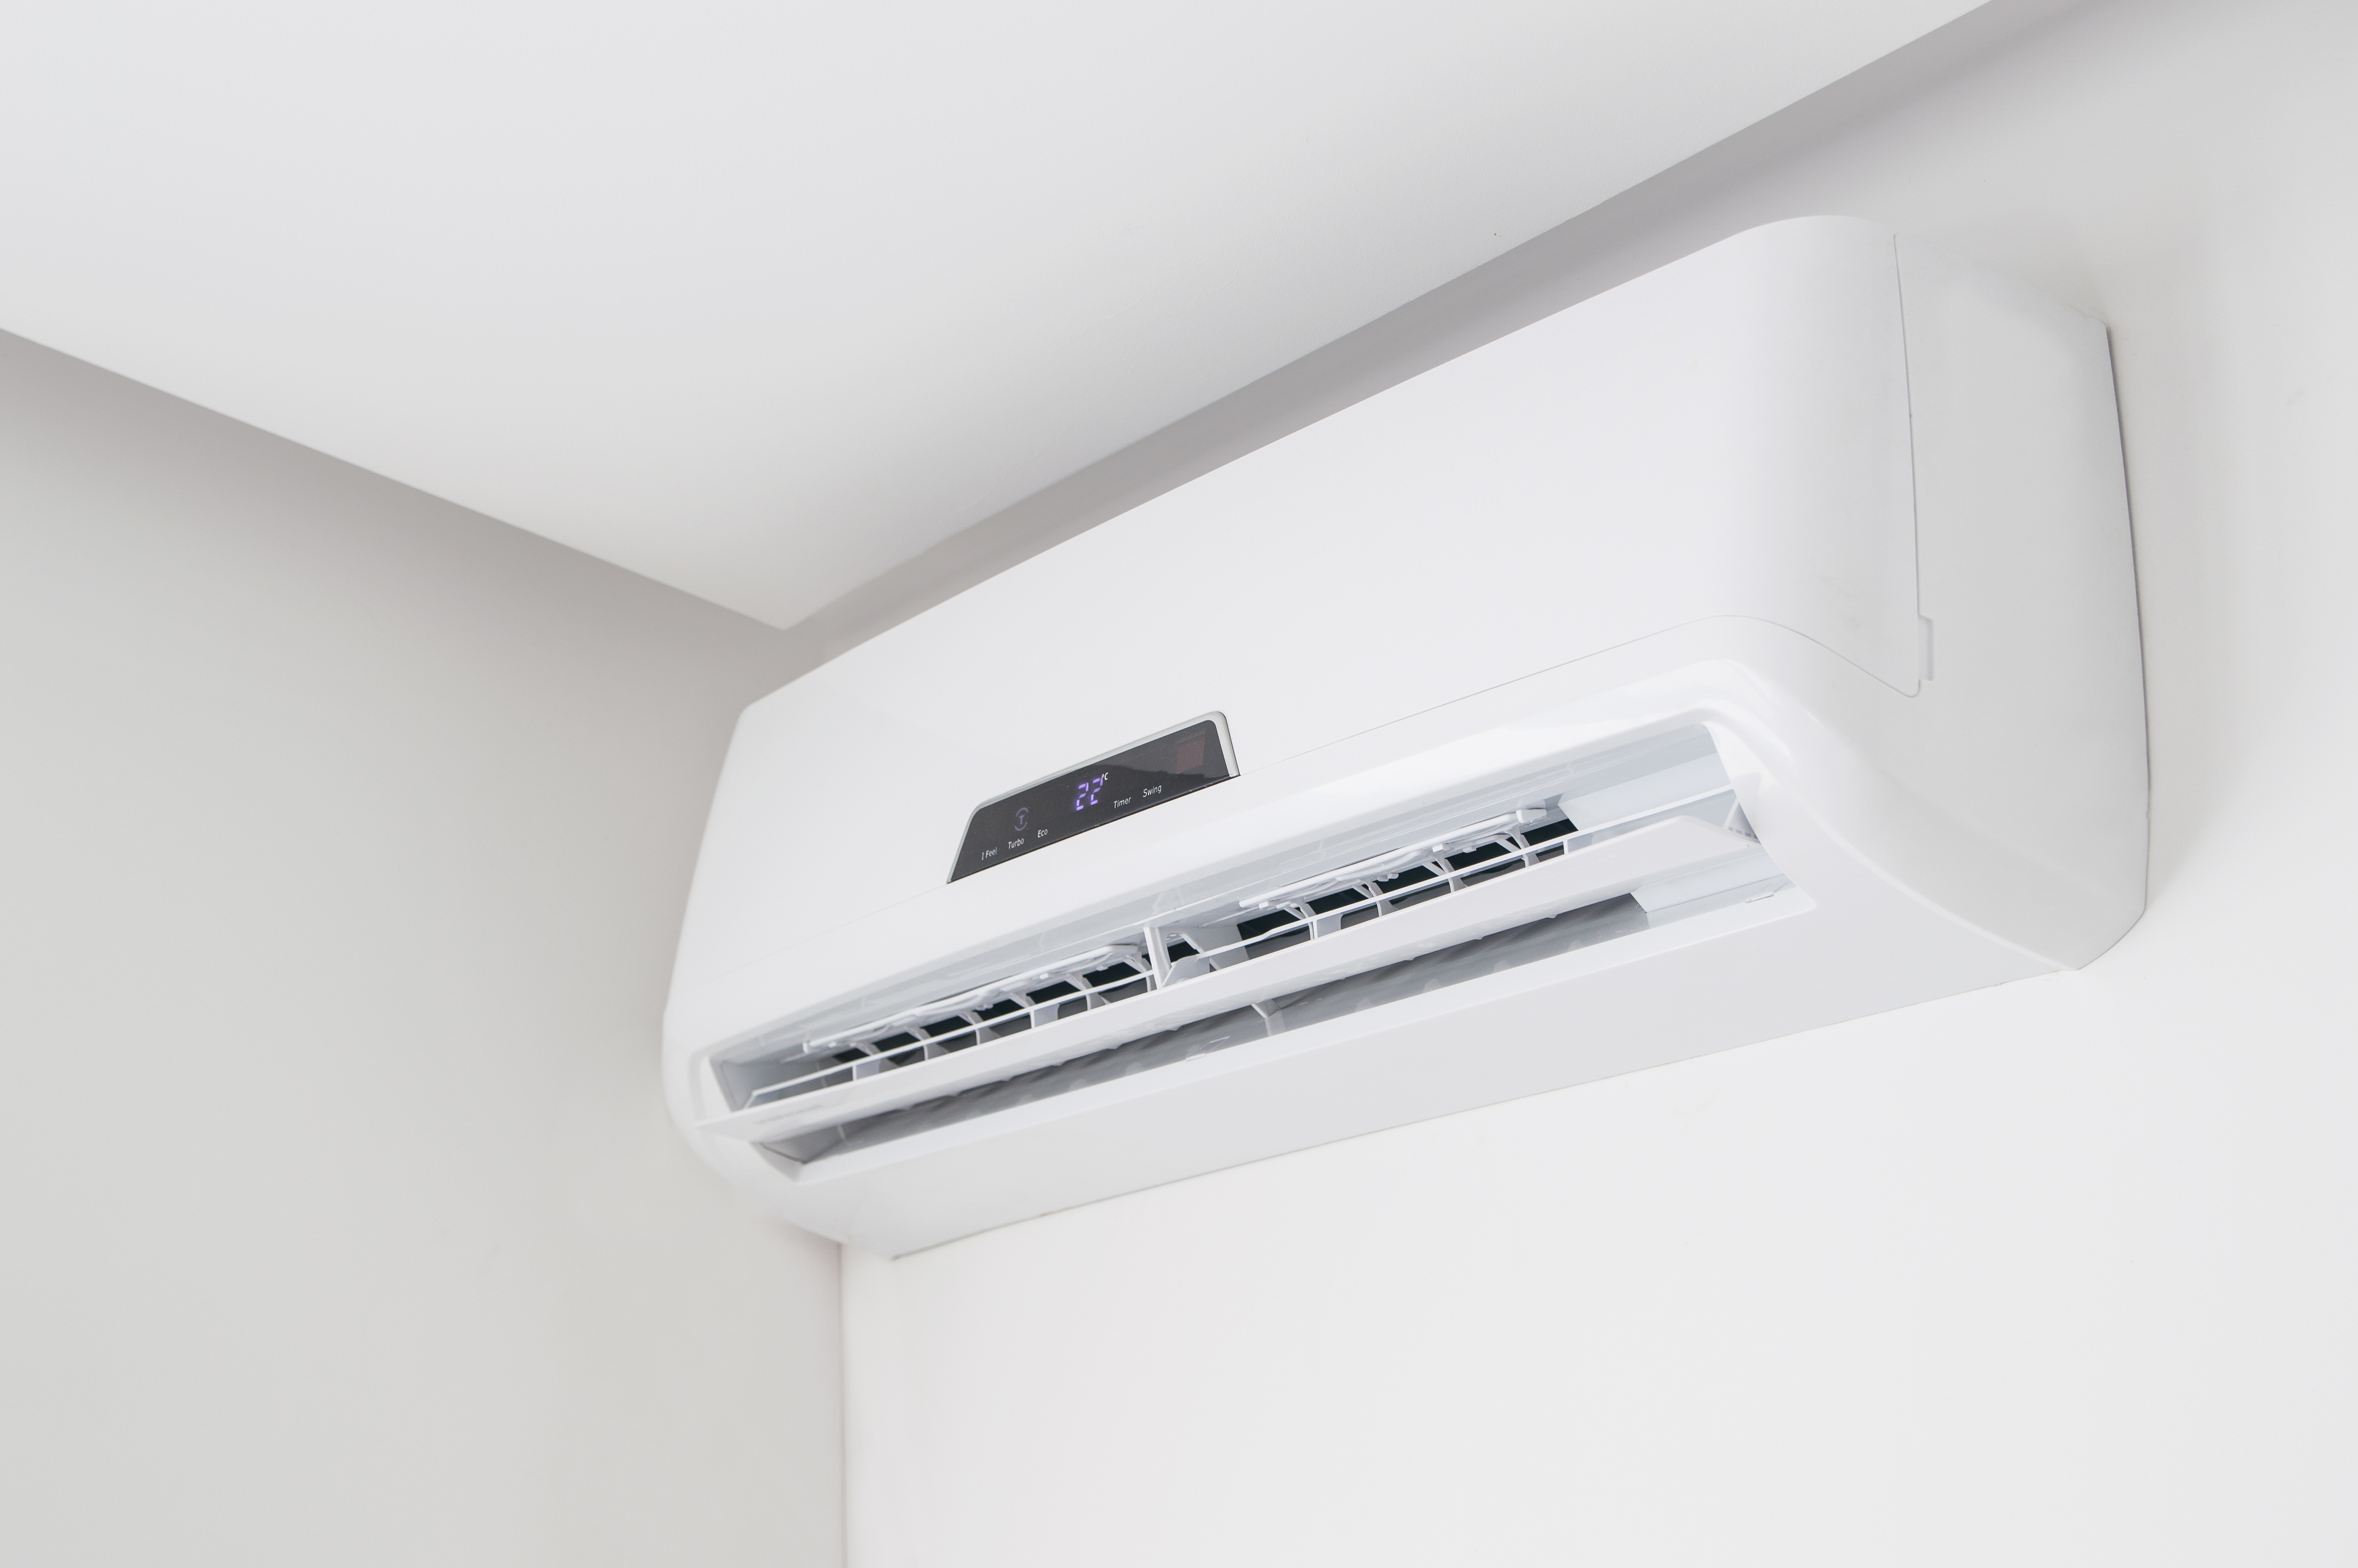 Wall-mounted air conditioning unit with a digital display, installed in a corner near the ceiling